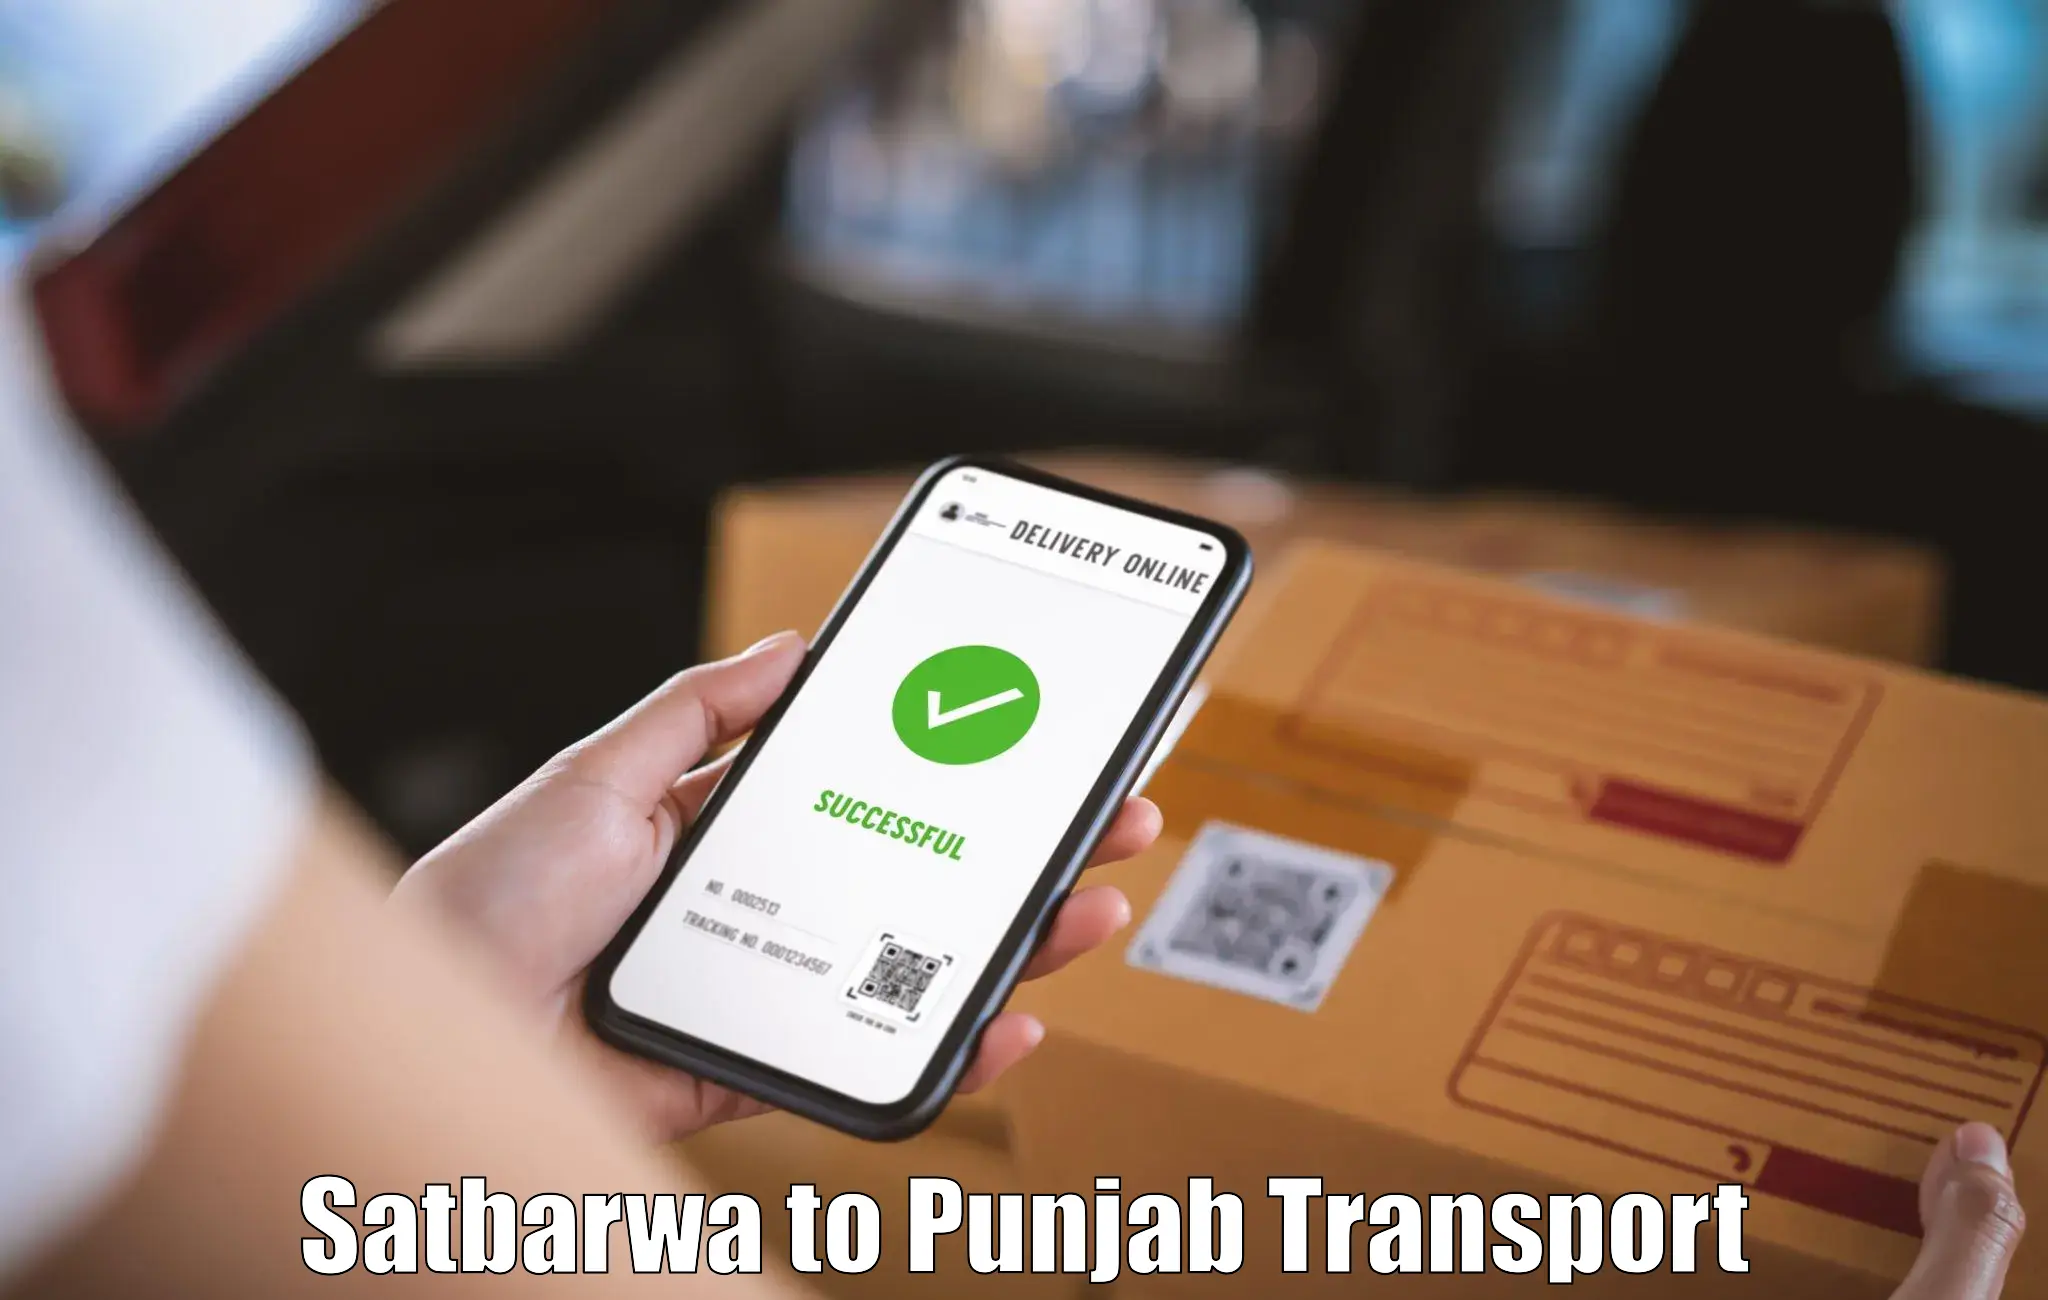 Two wheeler parcel service Satbarwa to Sultanpur Lodhi